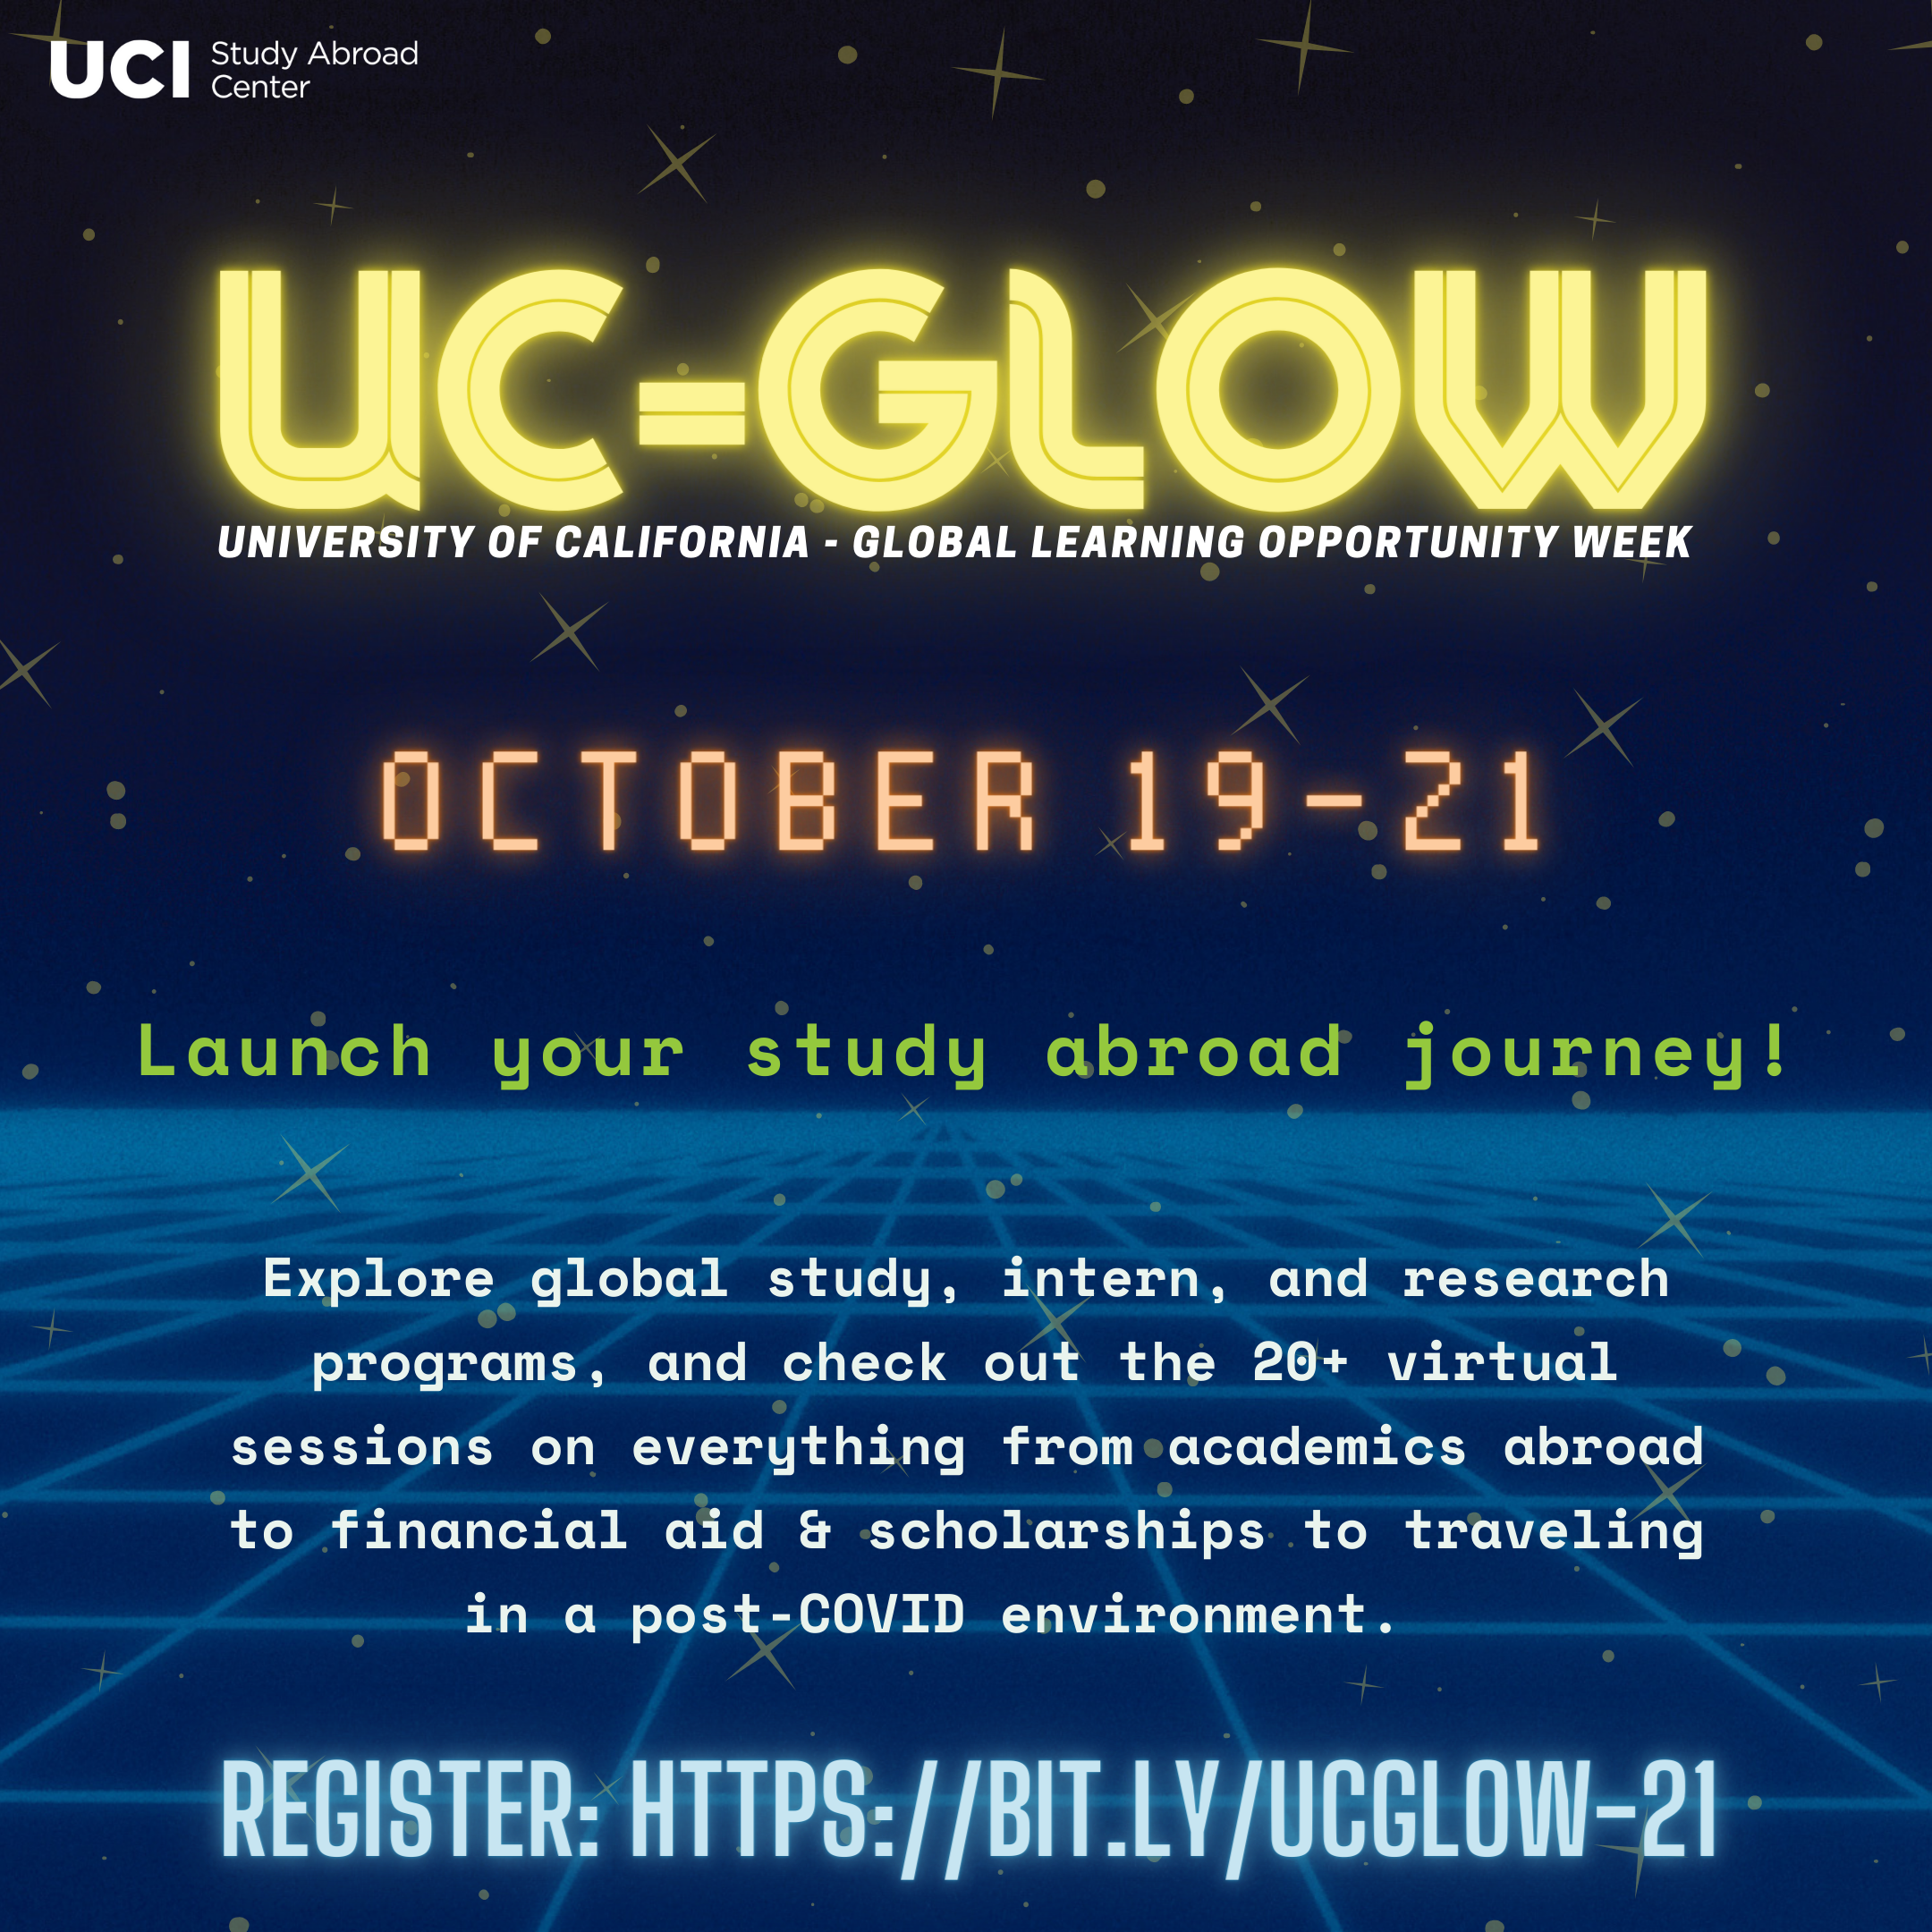 UC-GLOW. University of California Global Learning Opportunities Week. Oct 19-21. Launch your study abroad journey! Explore global study, intern, and research programs, and check out the 20+ virtual sessions on everything from academics abroad to financial aid & scholarships to traveling in a post-COVID environment Register: https://bit.ly/UCGLOW-21